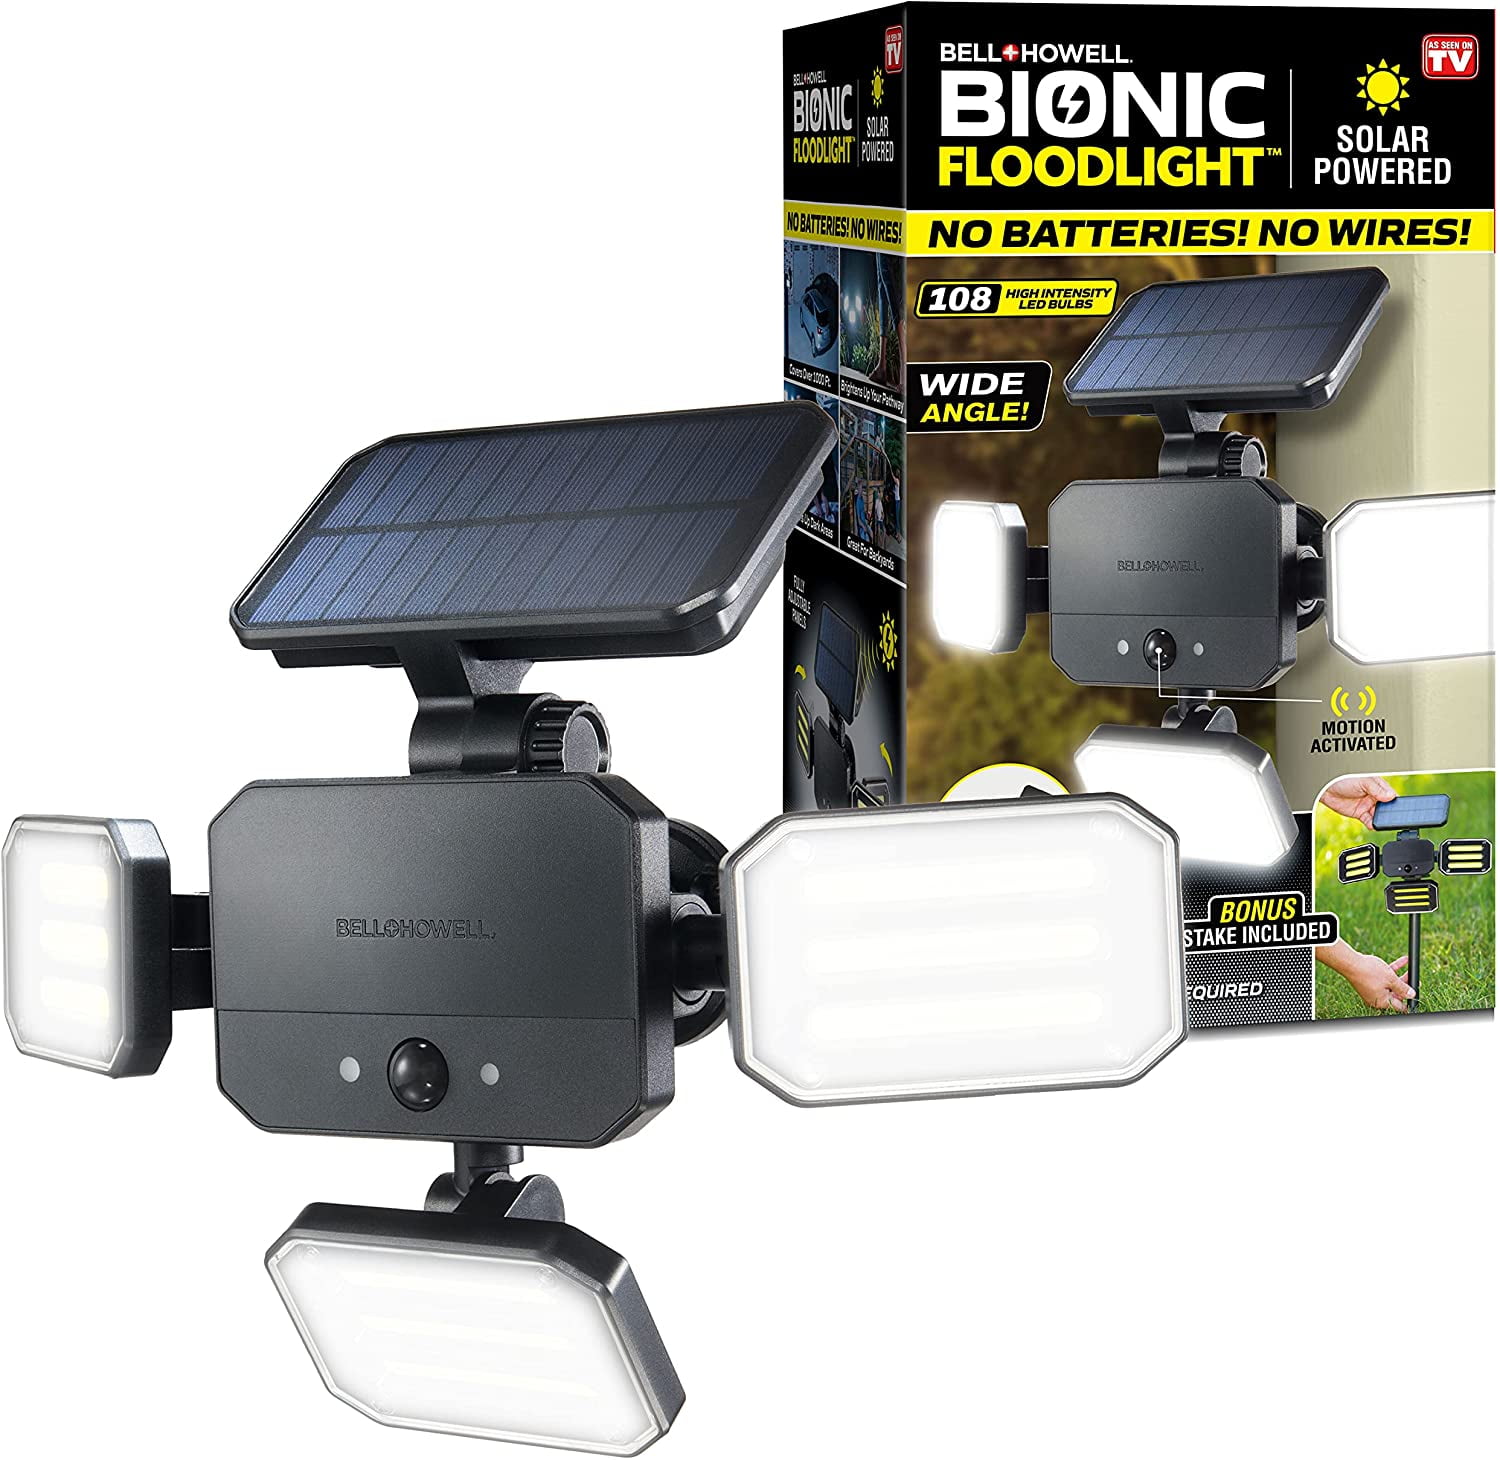 Bell and Howell Bionic Floodlight, Outdoor Solar Lights with Motion Sensor